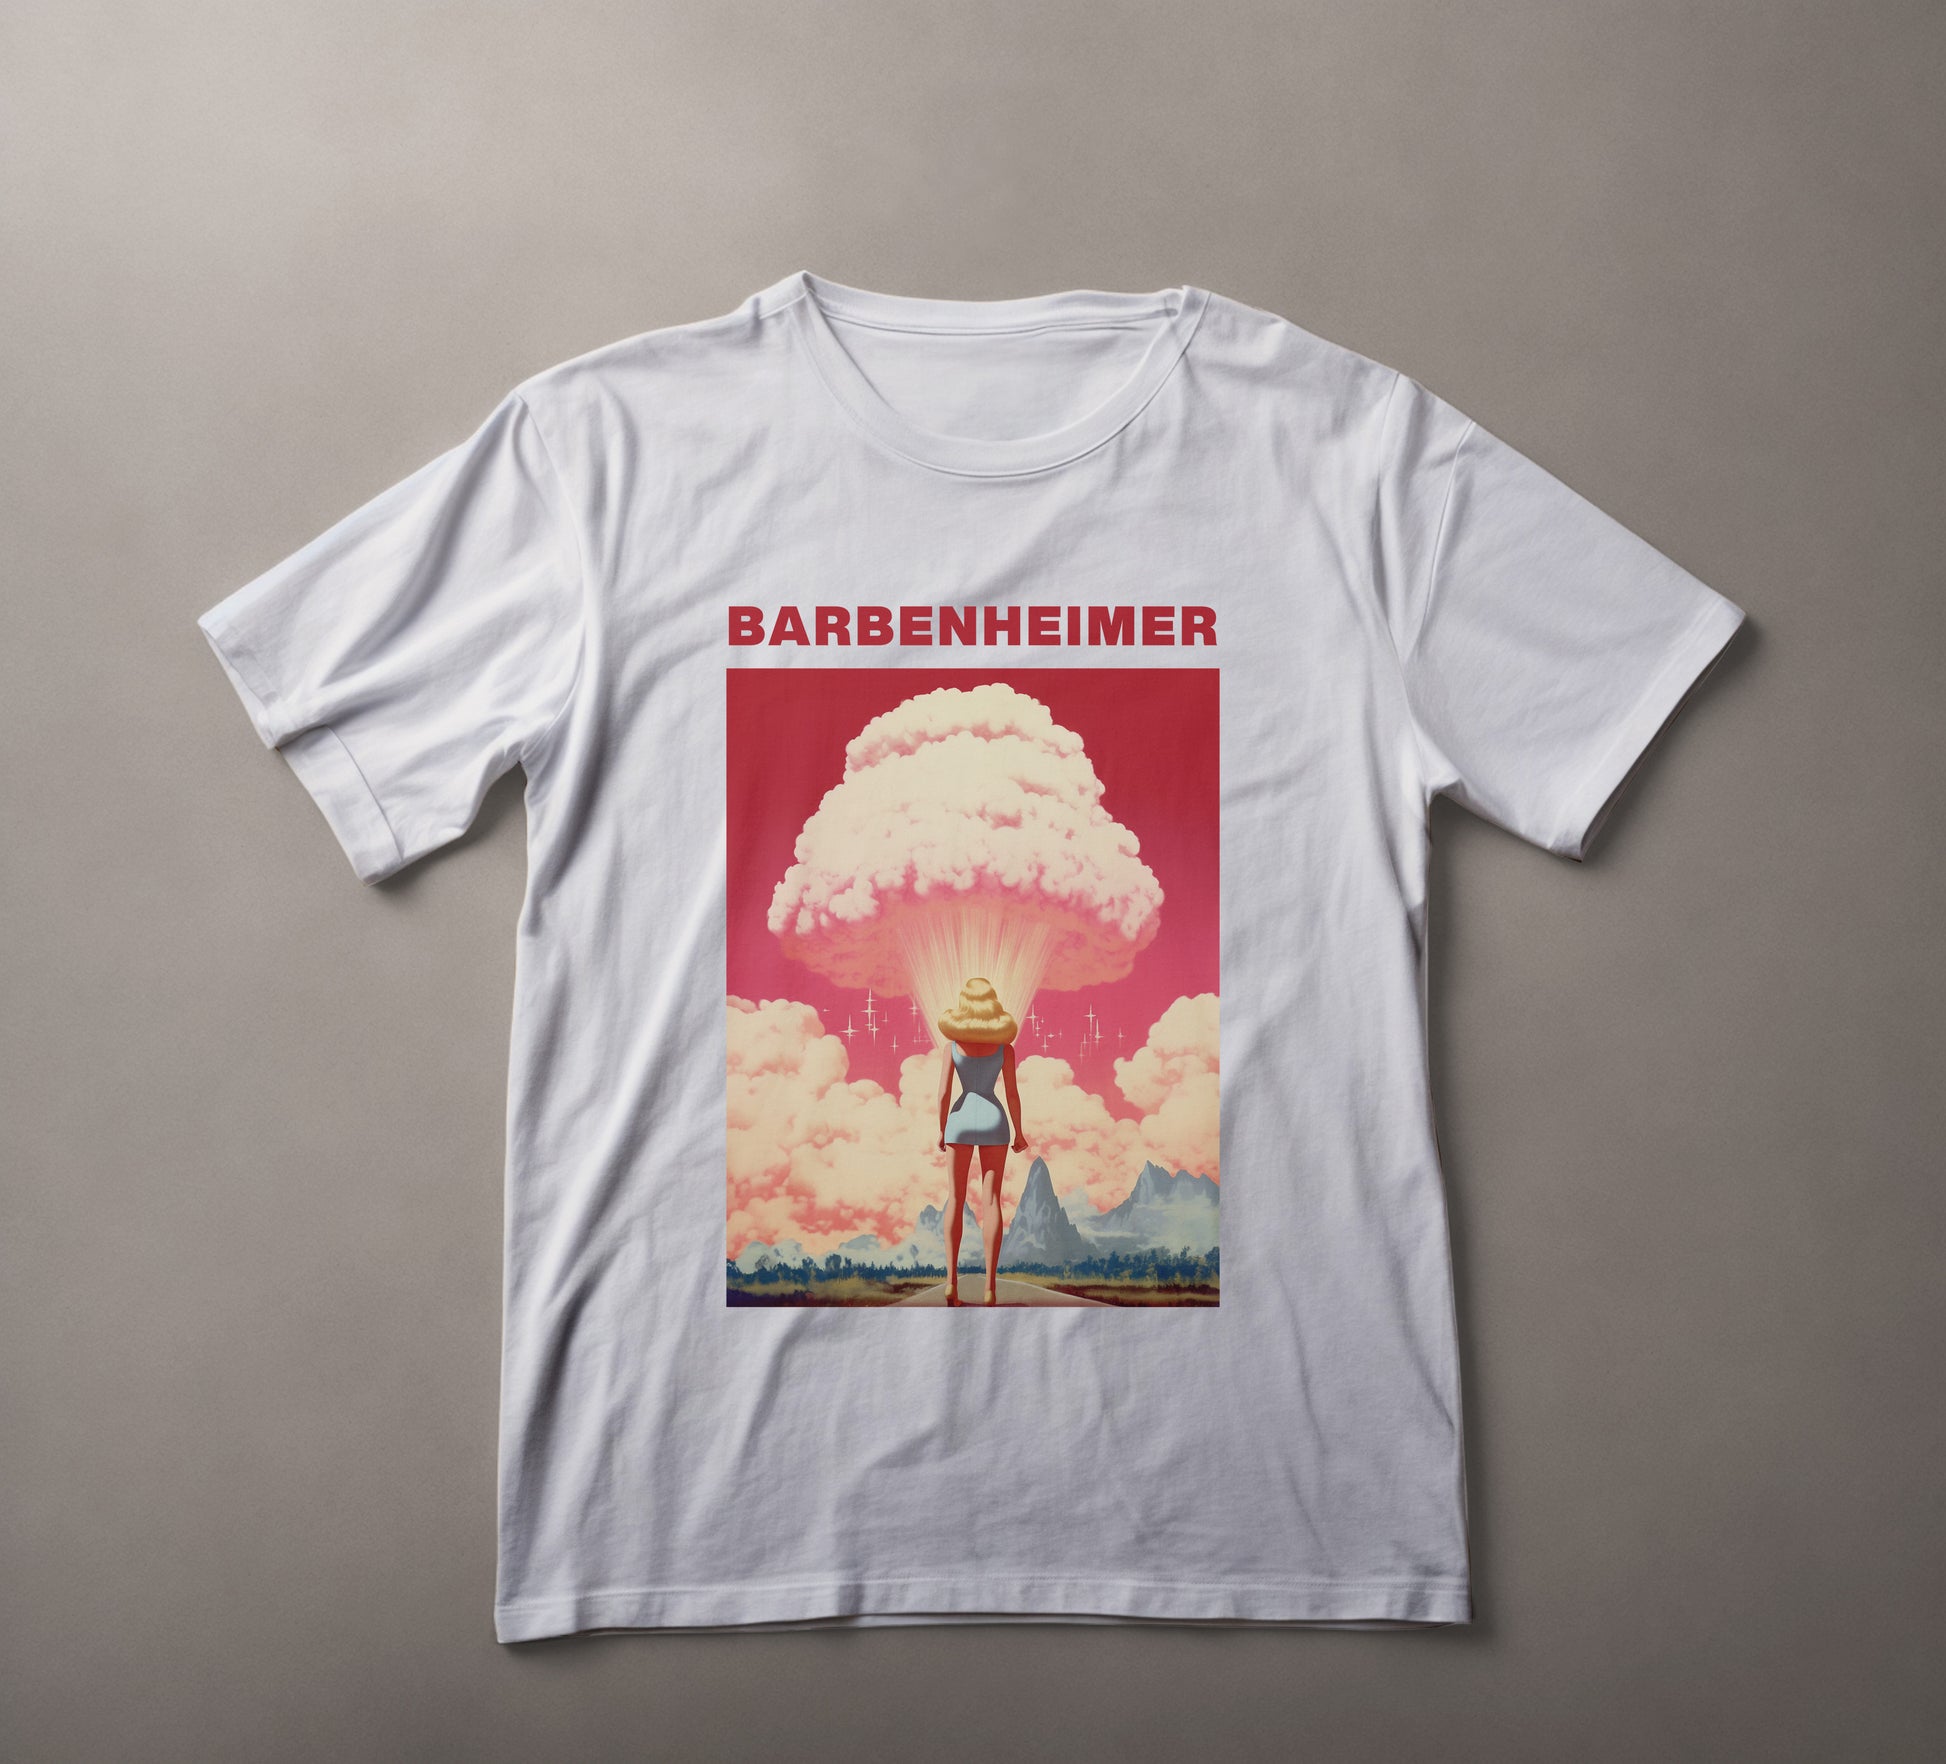 barbenheimer, barbie, oppenheimer, vintage t-shirt, retro sunset shirt, adventure graphic tee, nuclear explosion design, indie fashion, conversation starter t-shirt, bold statement tee, cheeky humor clothing, edgy apparel, unique print shirts